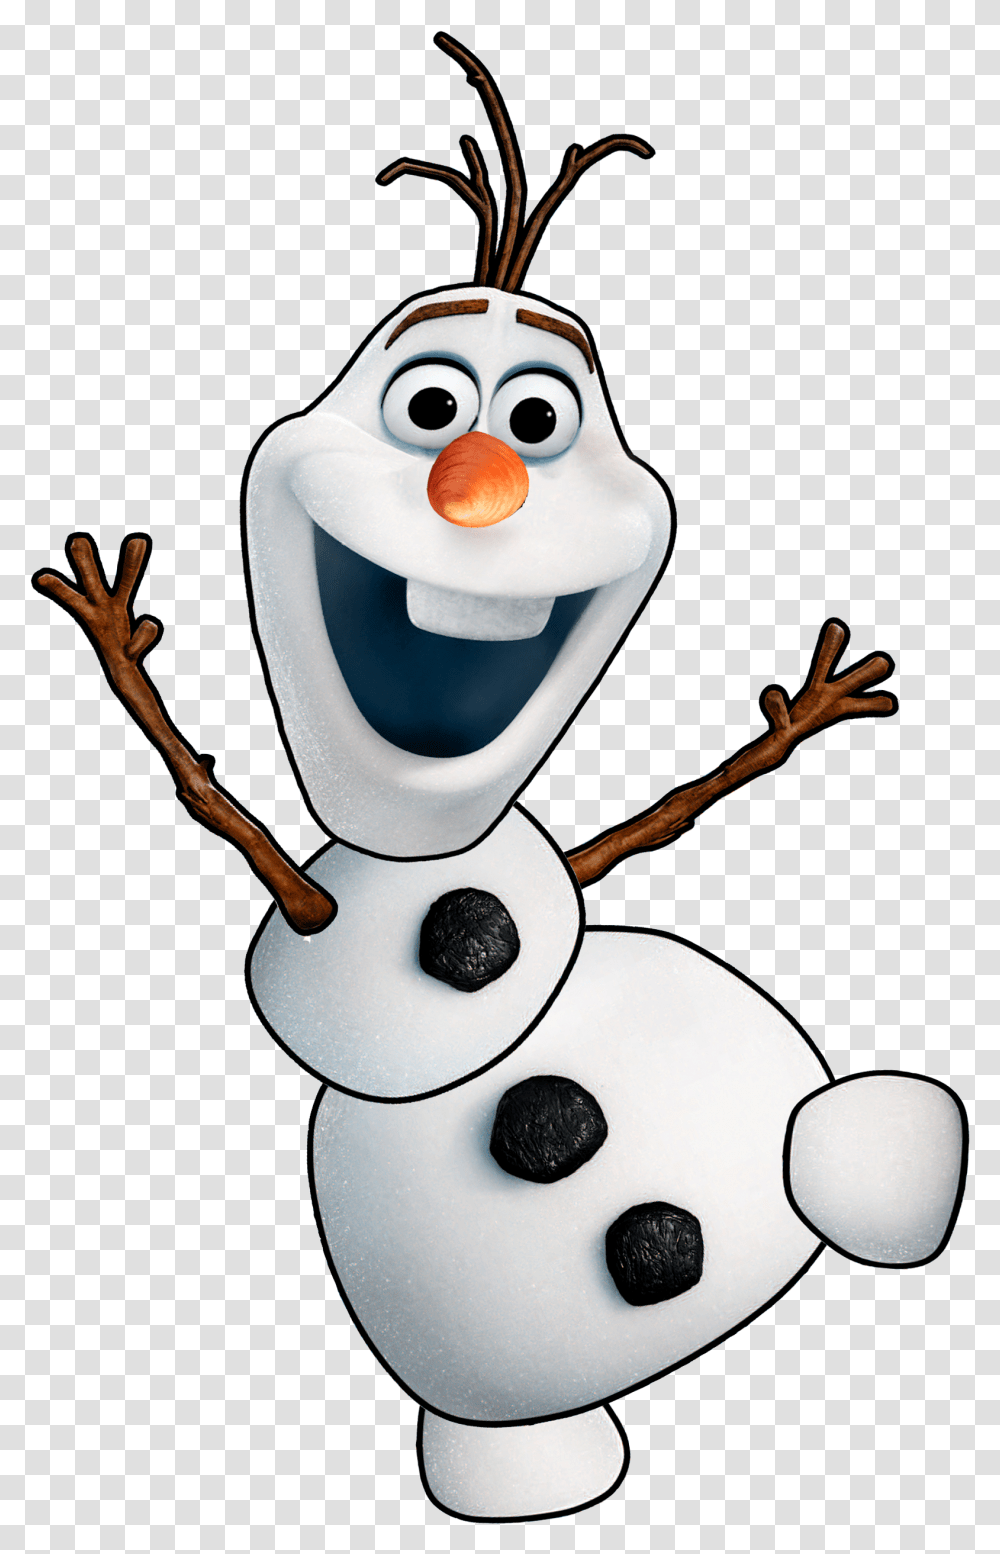 olaf frozen summer clip art car tuning free clipart frozen olaf printable snowman winter outdoors nature transparent png pngset com